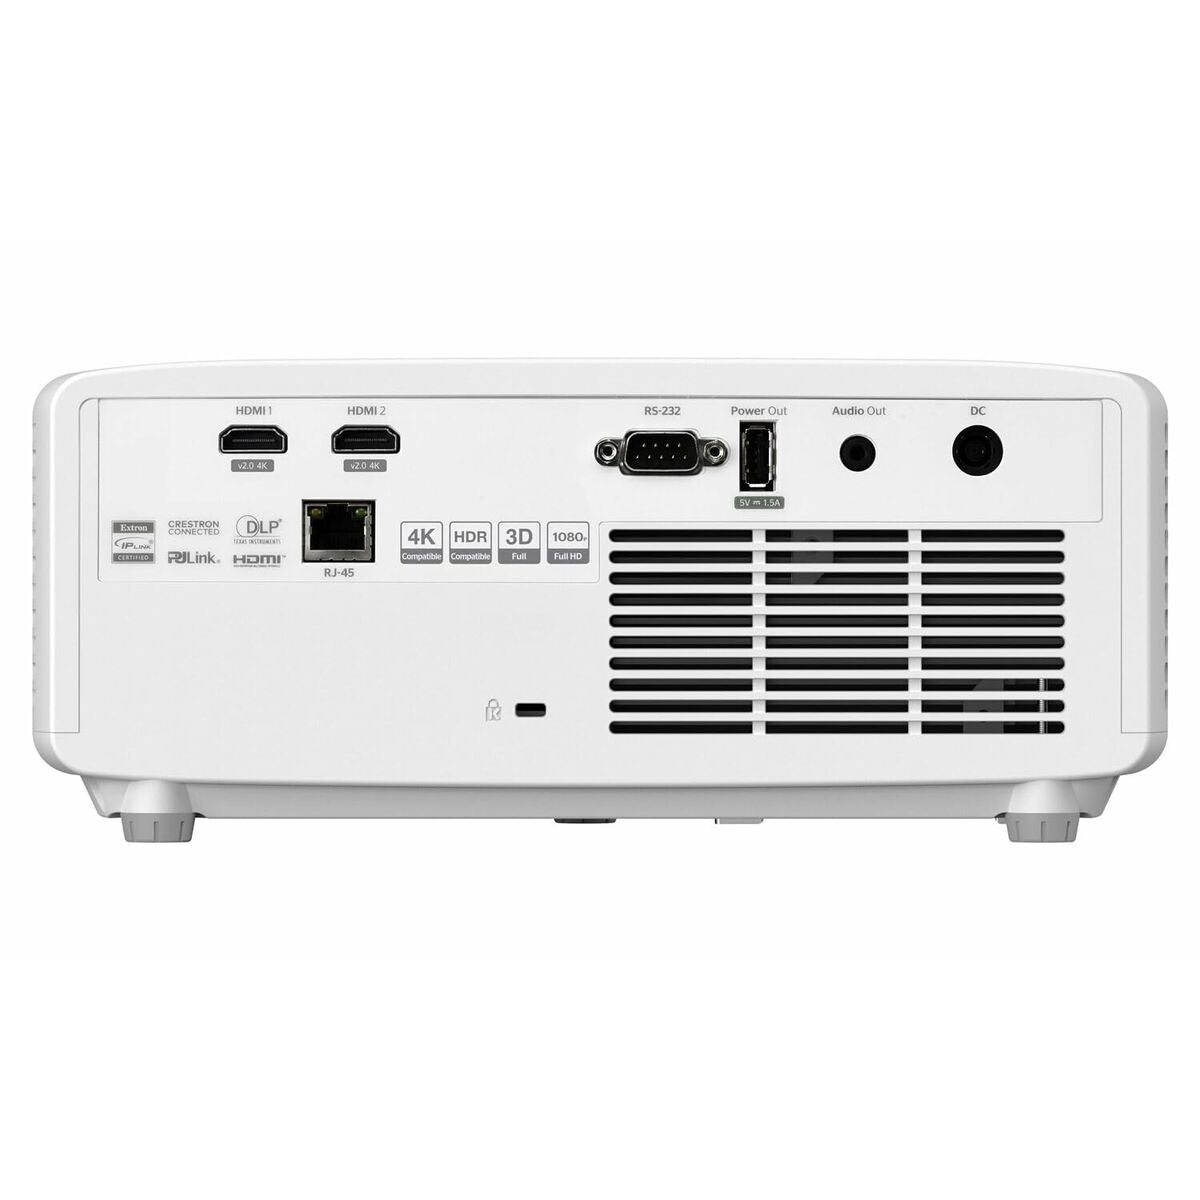 Projector Optoma ZH520 5500 Lm 1920 x 1080 px, Optoma, Electronics, TV, Video and home cinema, projector-optoma-zh520-5500-lm-1920-x-1080-px, :Ultra HD, Brand_Optoma, category-reference-2609, category-reference-2642, category-reference-2947, category-reference-t-18805, category-reference-t-18811, category-reference-t-19653, cinema and television, computers / peripherals, Condition_NEW, entertainment, office, Price_+ 1000, RiotNook